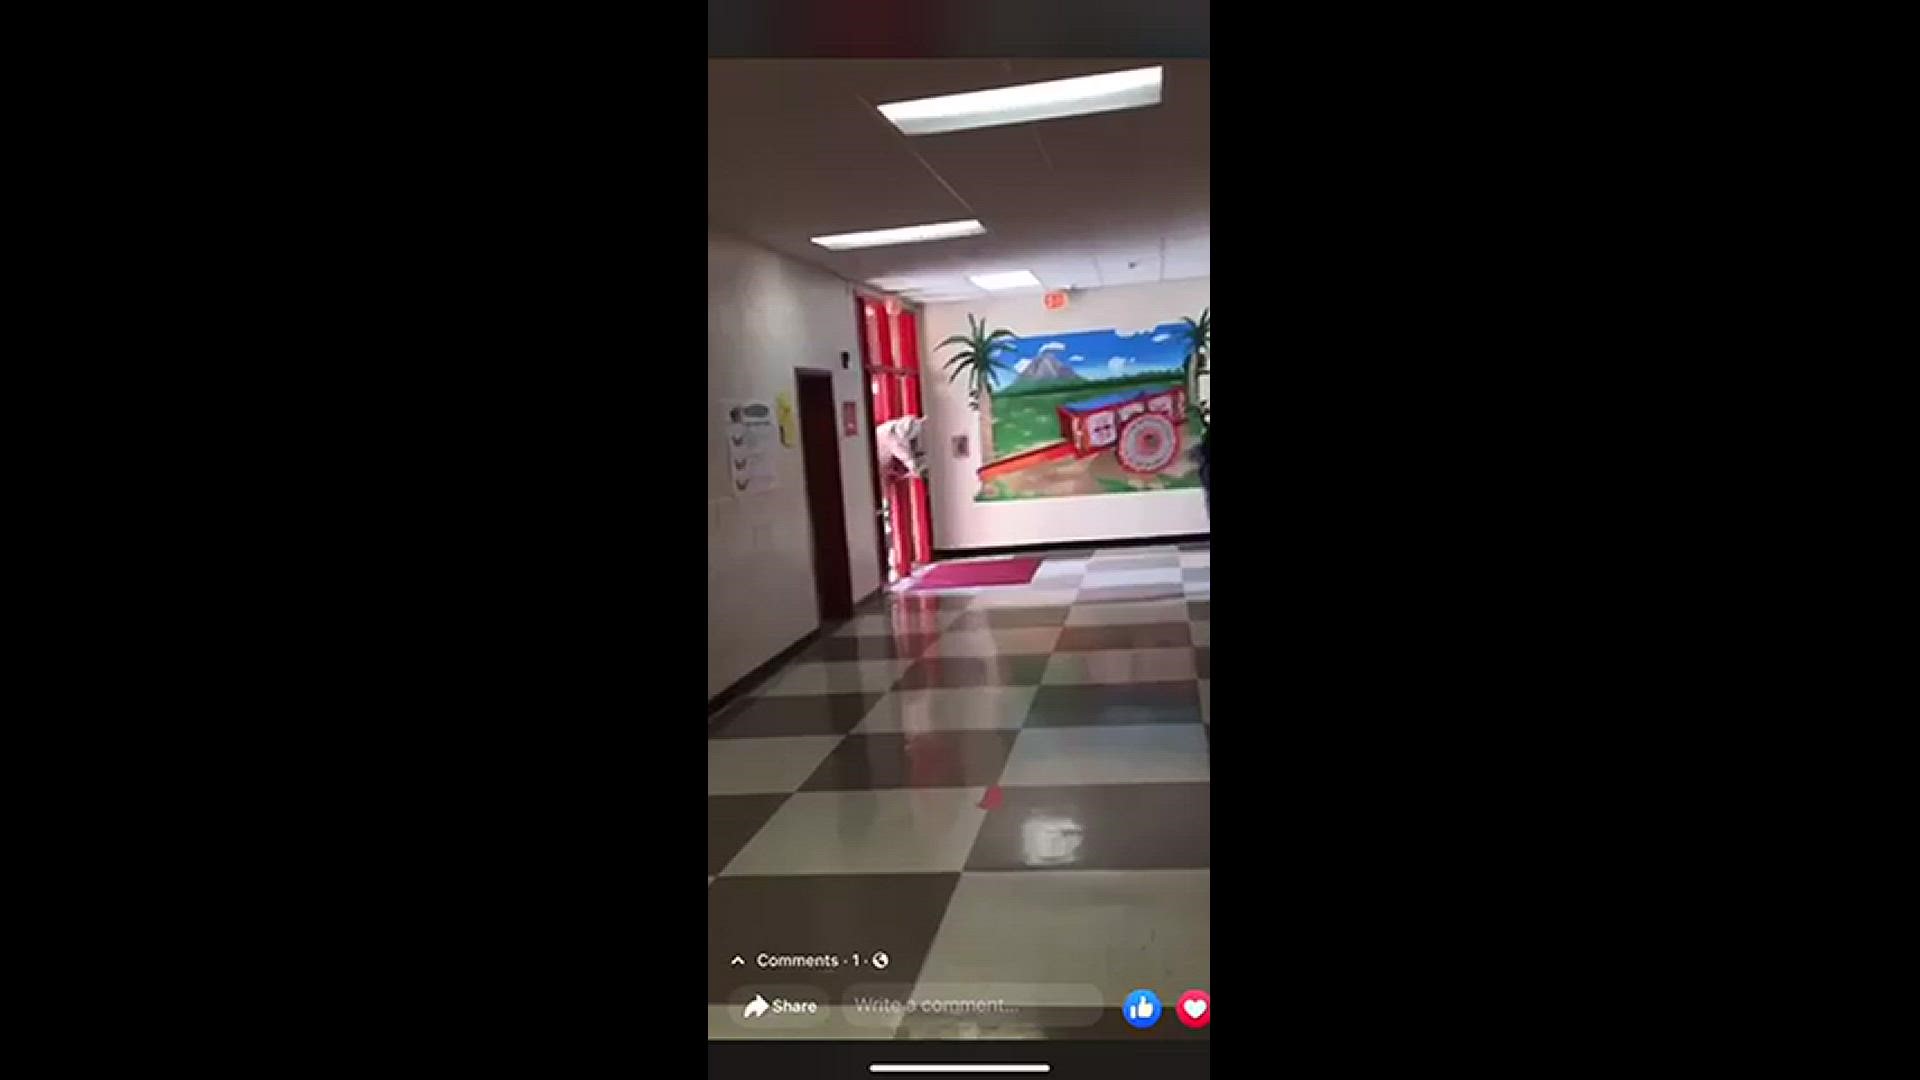 Austin McGill thought it would be a memorable senior prank, and it was. Video credit: Daniel Owens